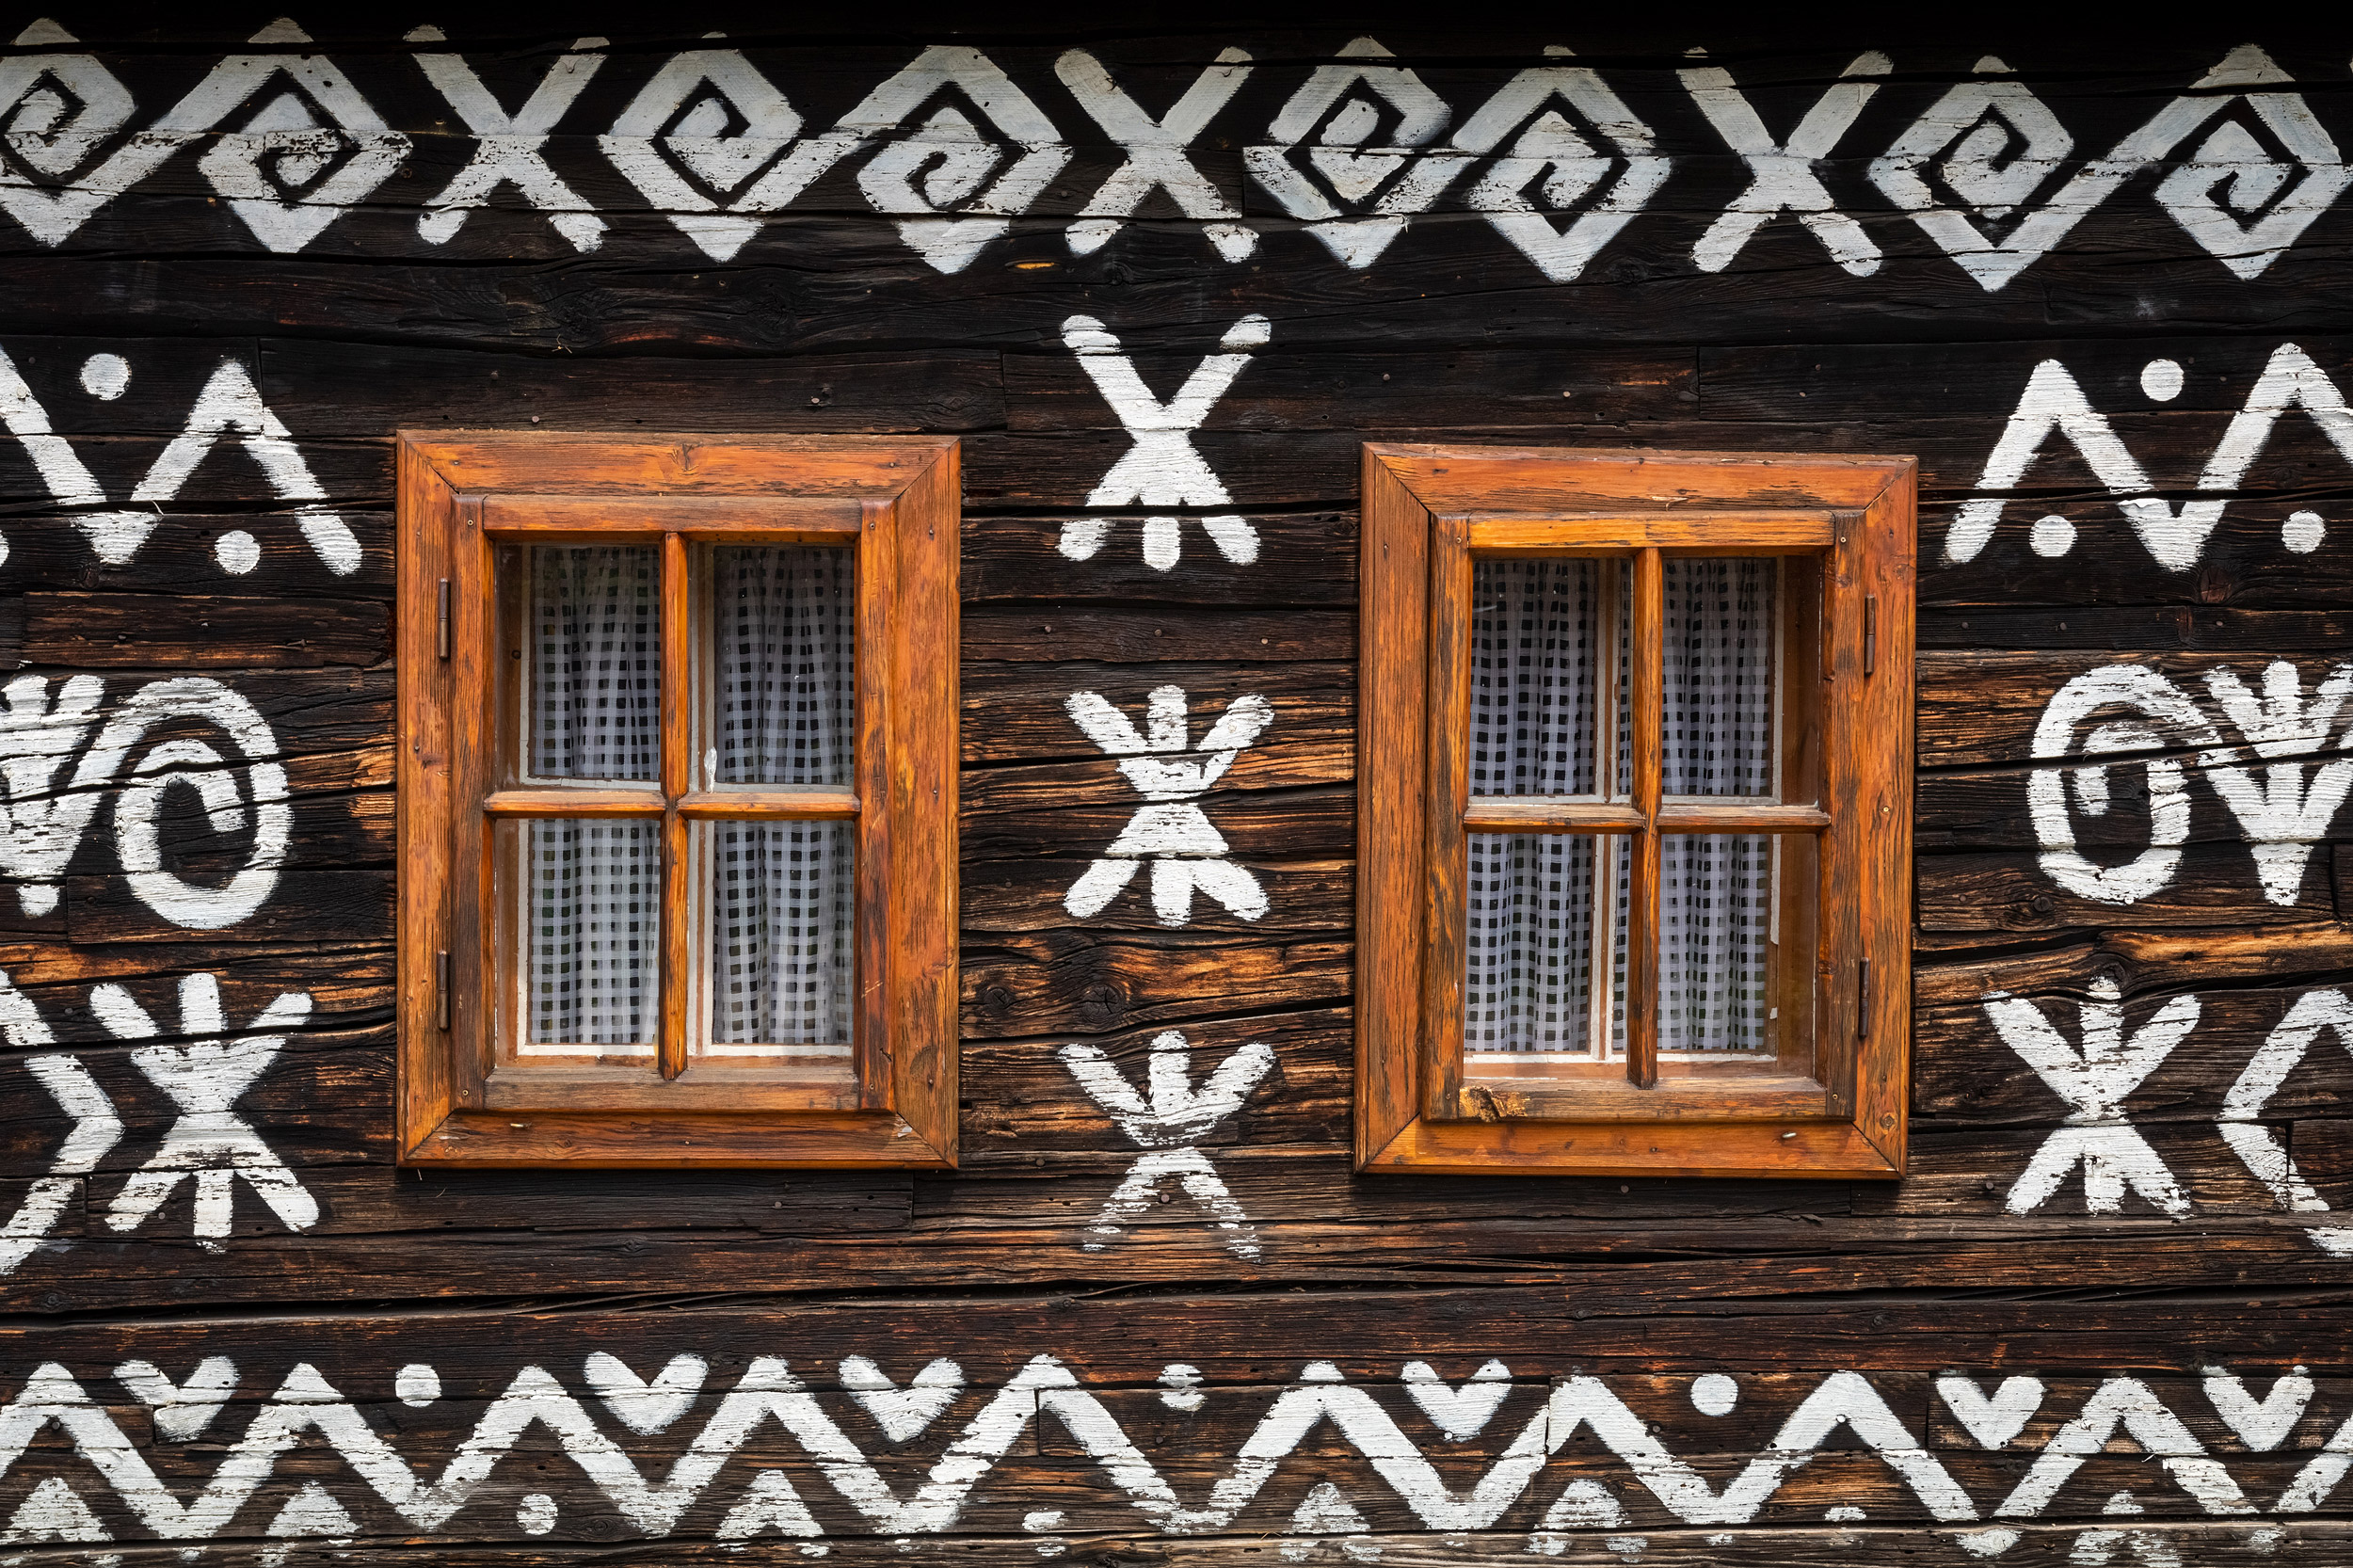 Old wooden houses in Slovakia UNESCO village Cicmany. The orname